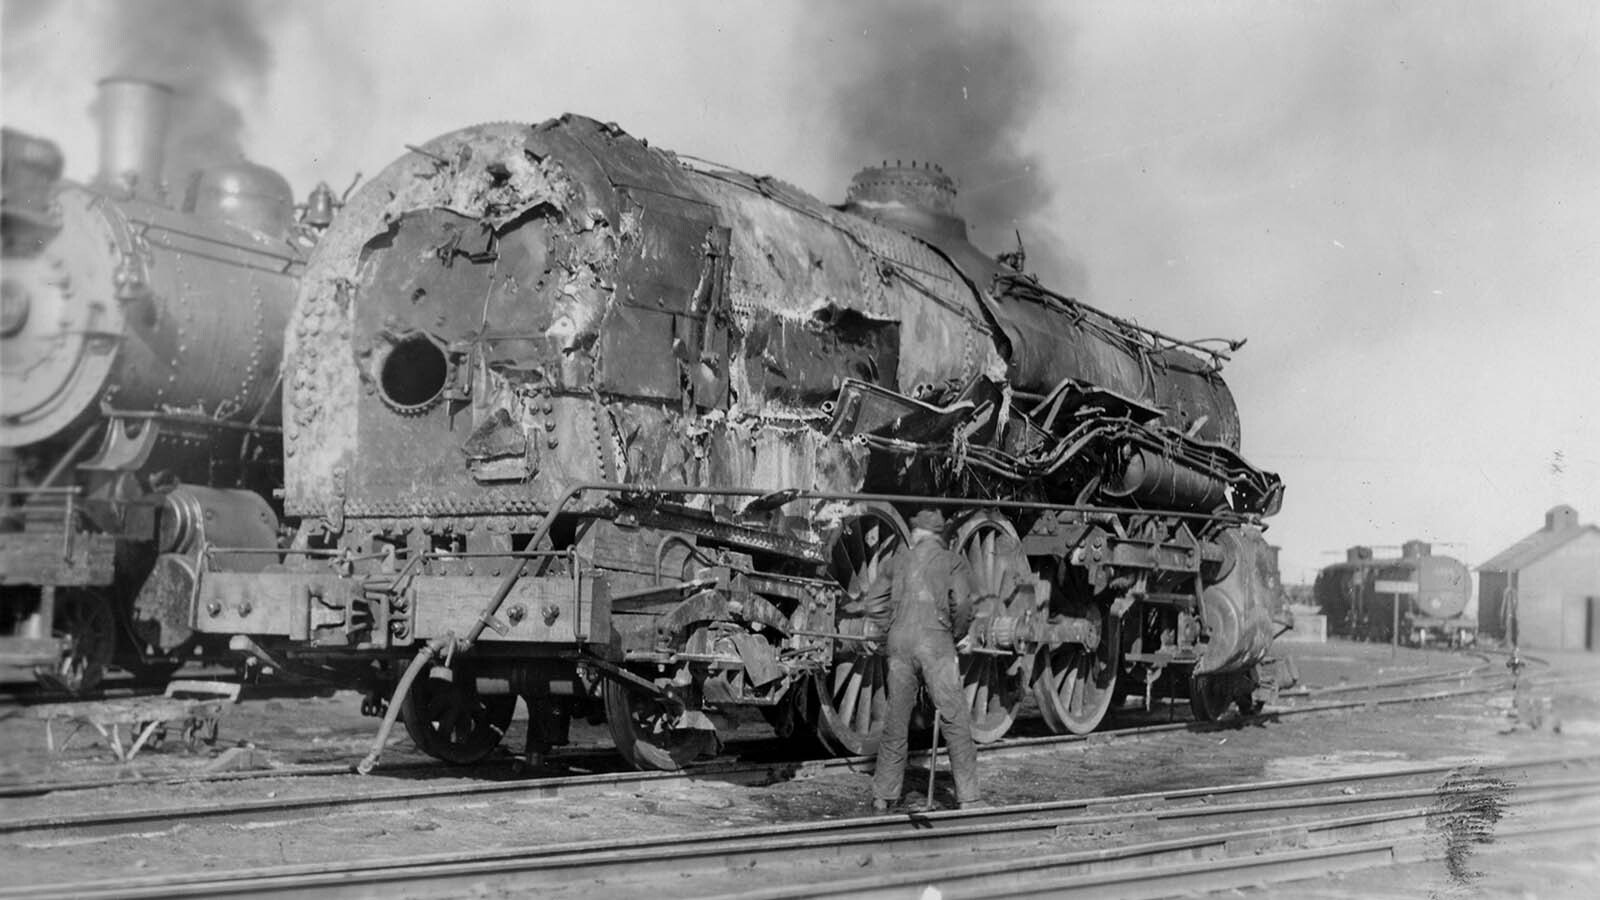 Locomotive No. 350 in the Casper Yard before being moved to the railroad's shops in Denver to be rebuilt.